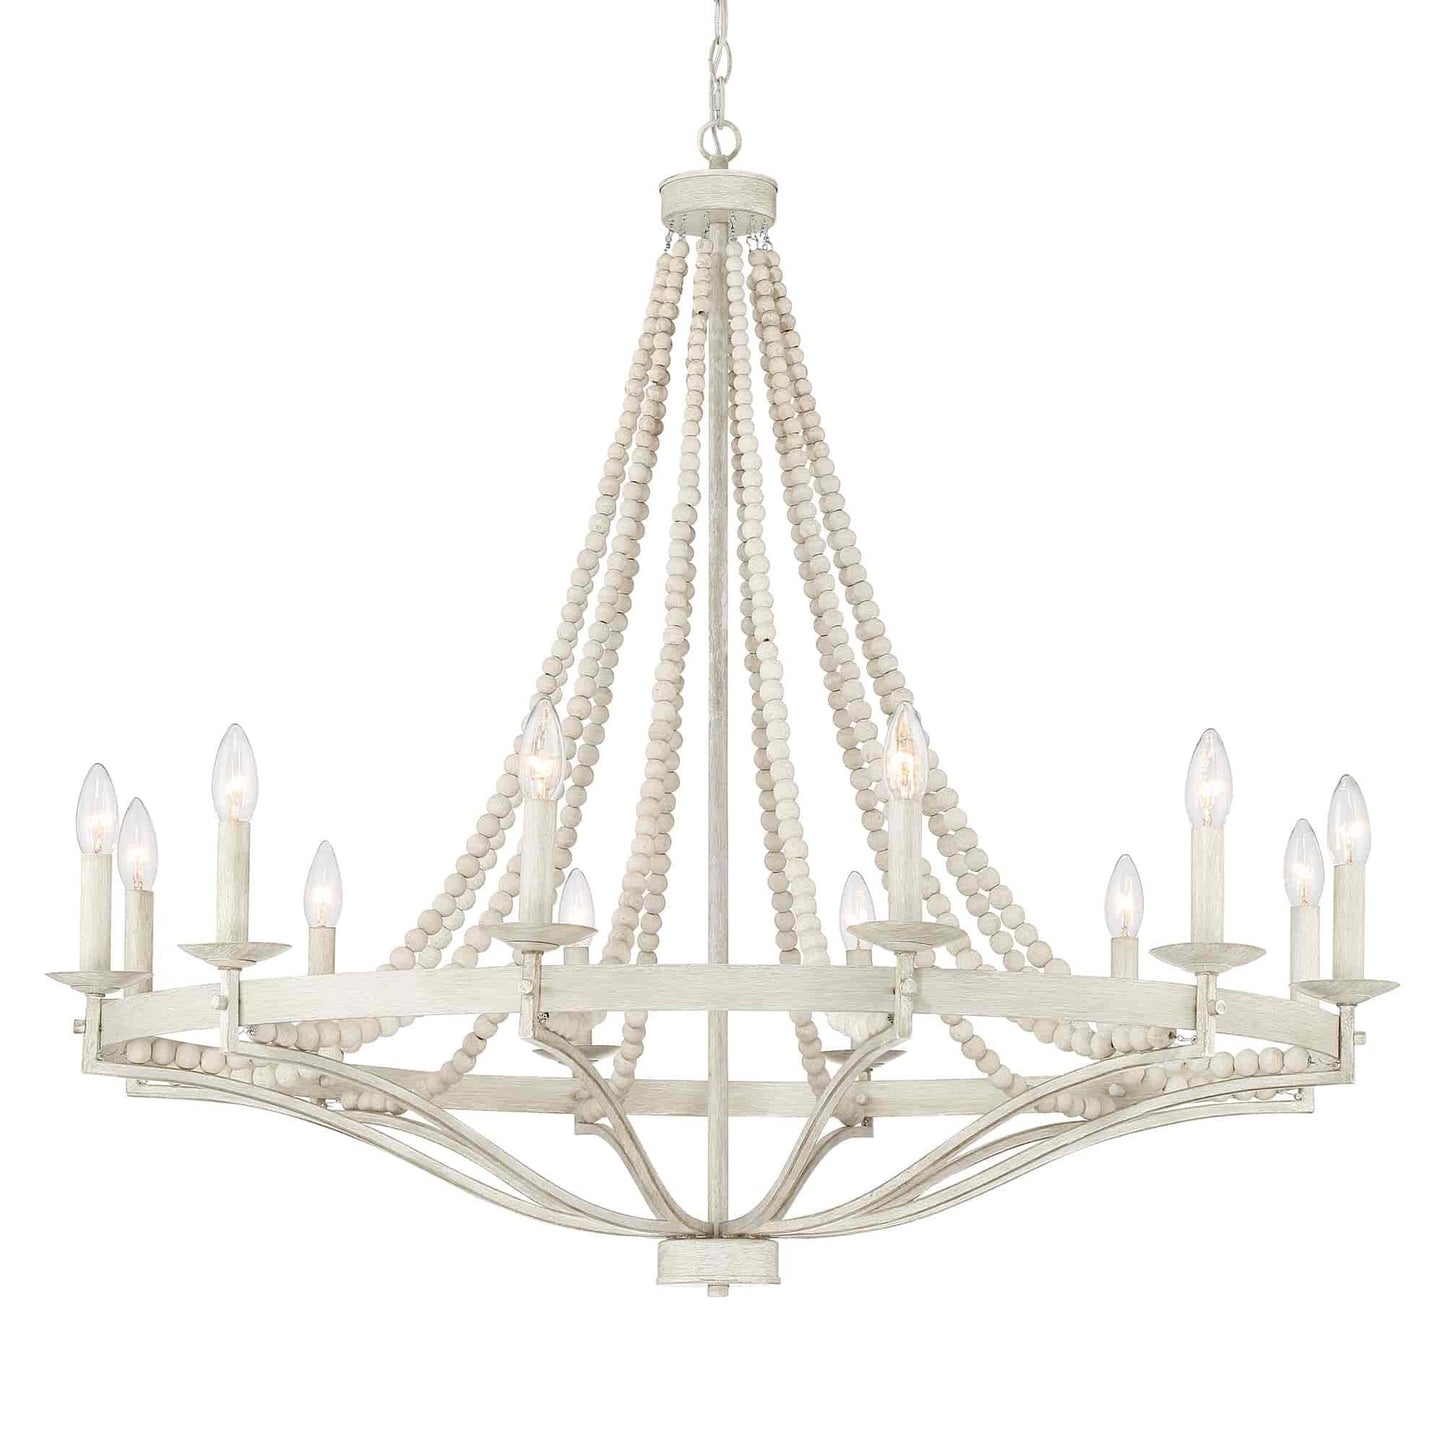 12 light candle style wagon wheel chandelier with beaded accents (14) by ACROMA